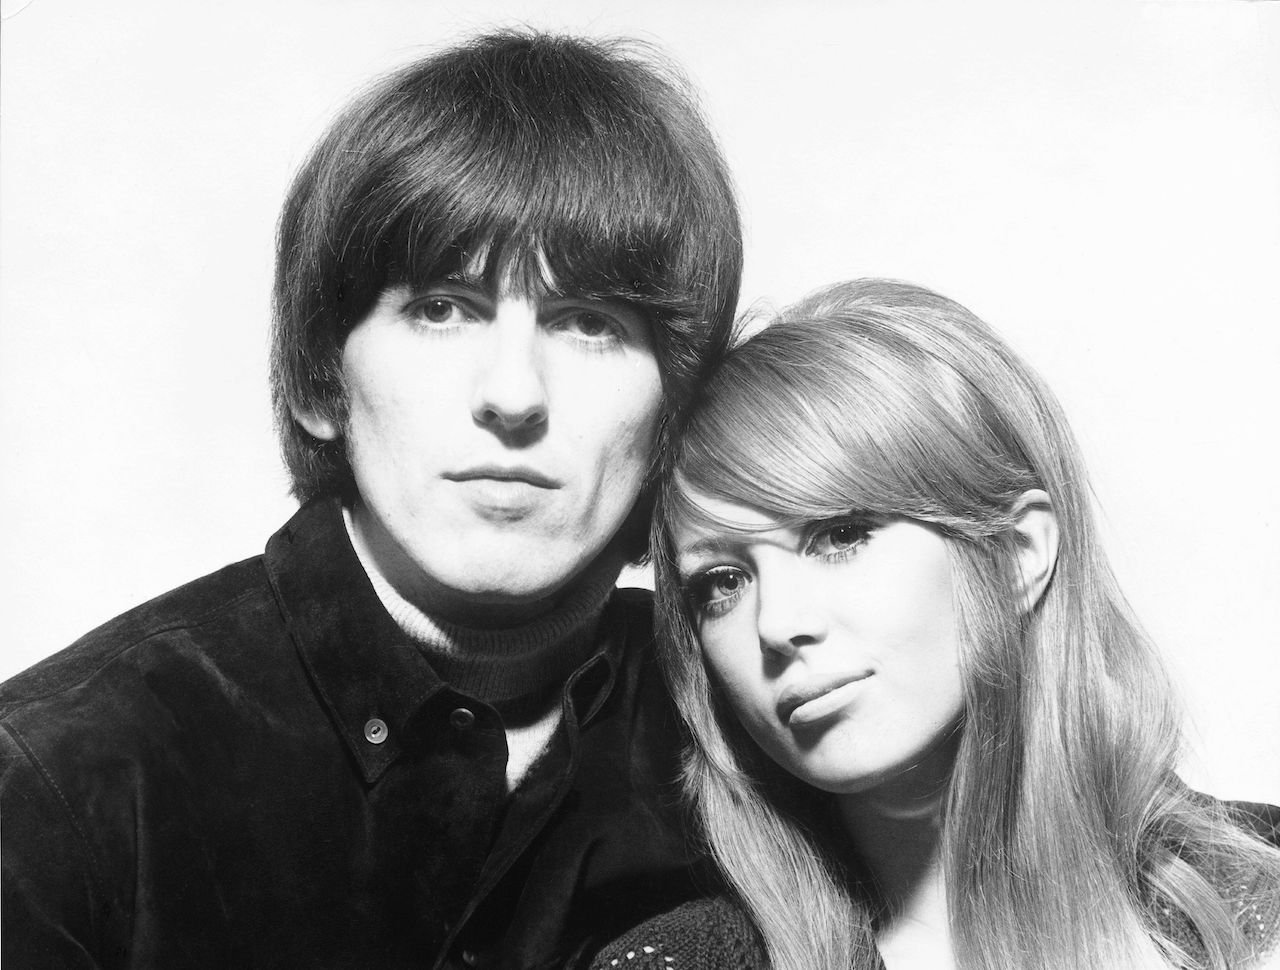 A pre-wedding picture of Beatle George Harrison and his wife, Pattie Boyd, who said their life together was 'ludicrous and hateful.'